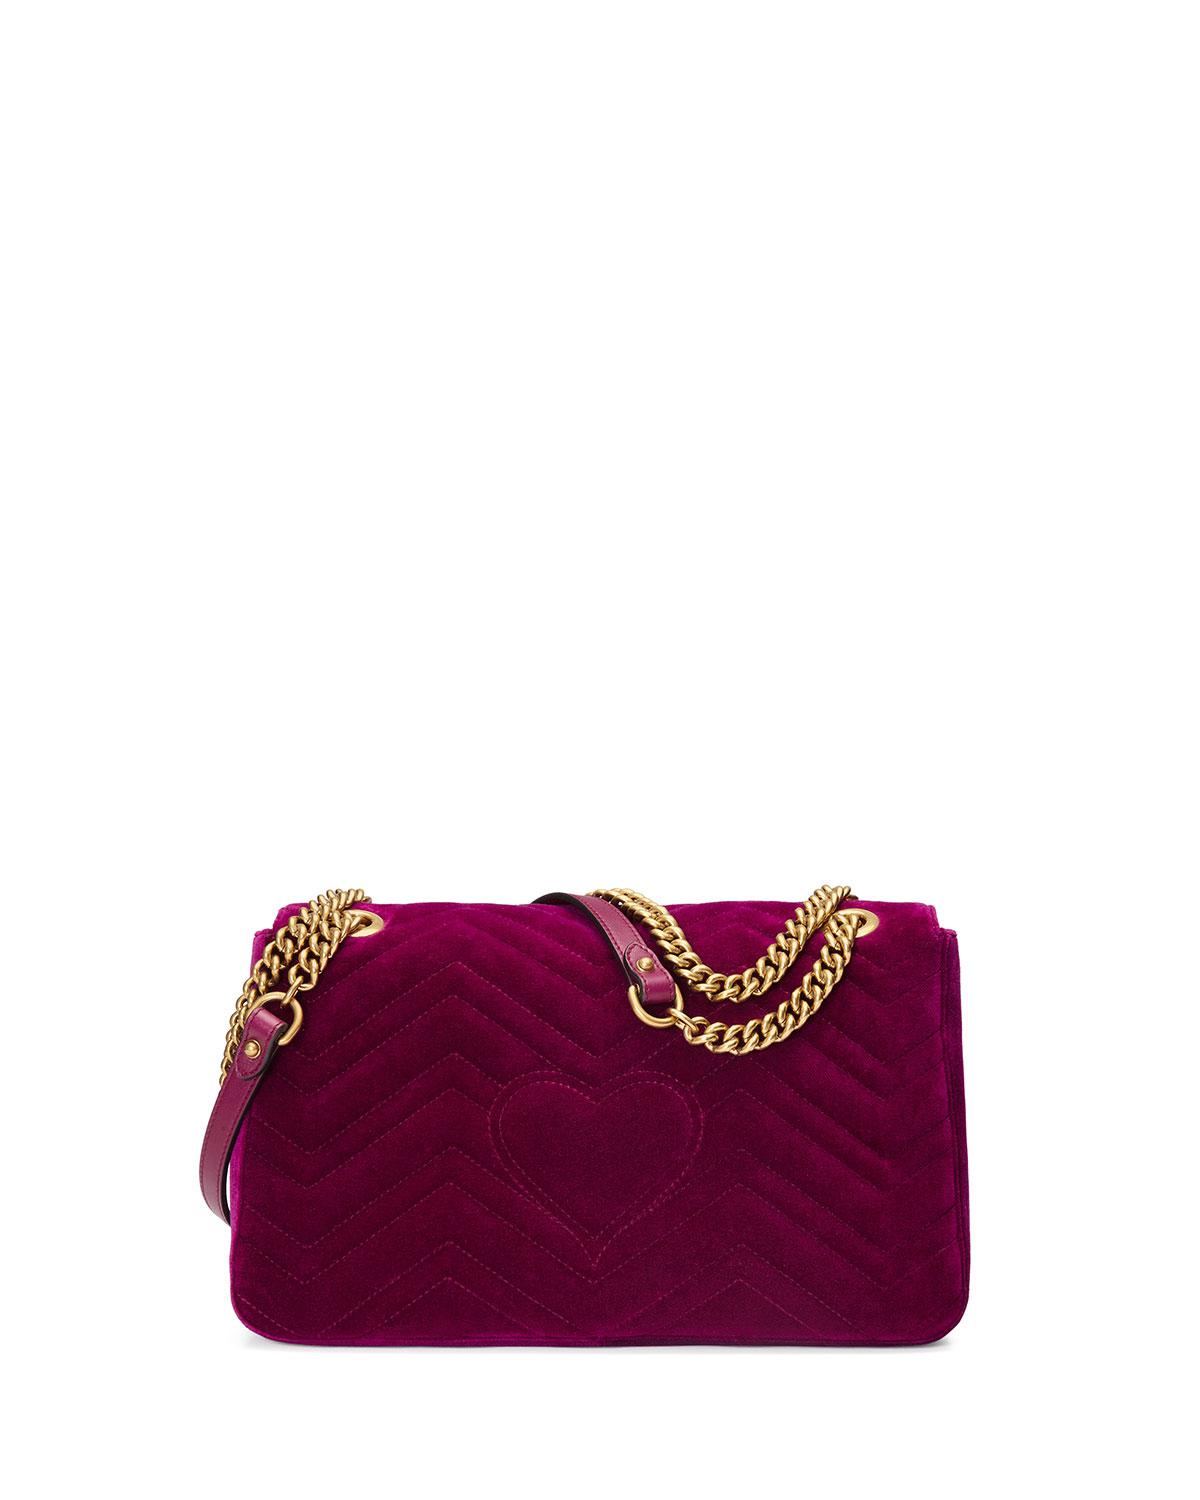 Gucci Velvet Gg Marmont 2.0 Small Loved Shoulder Bag in Fuchsia (Purple) - Lyst